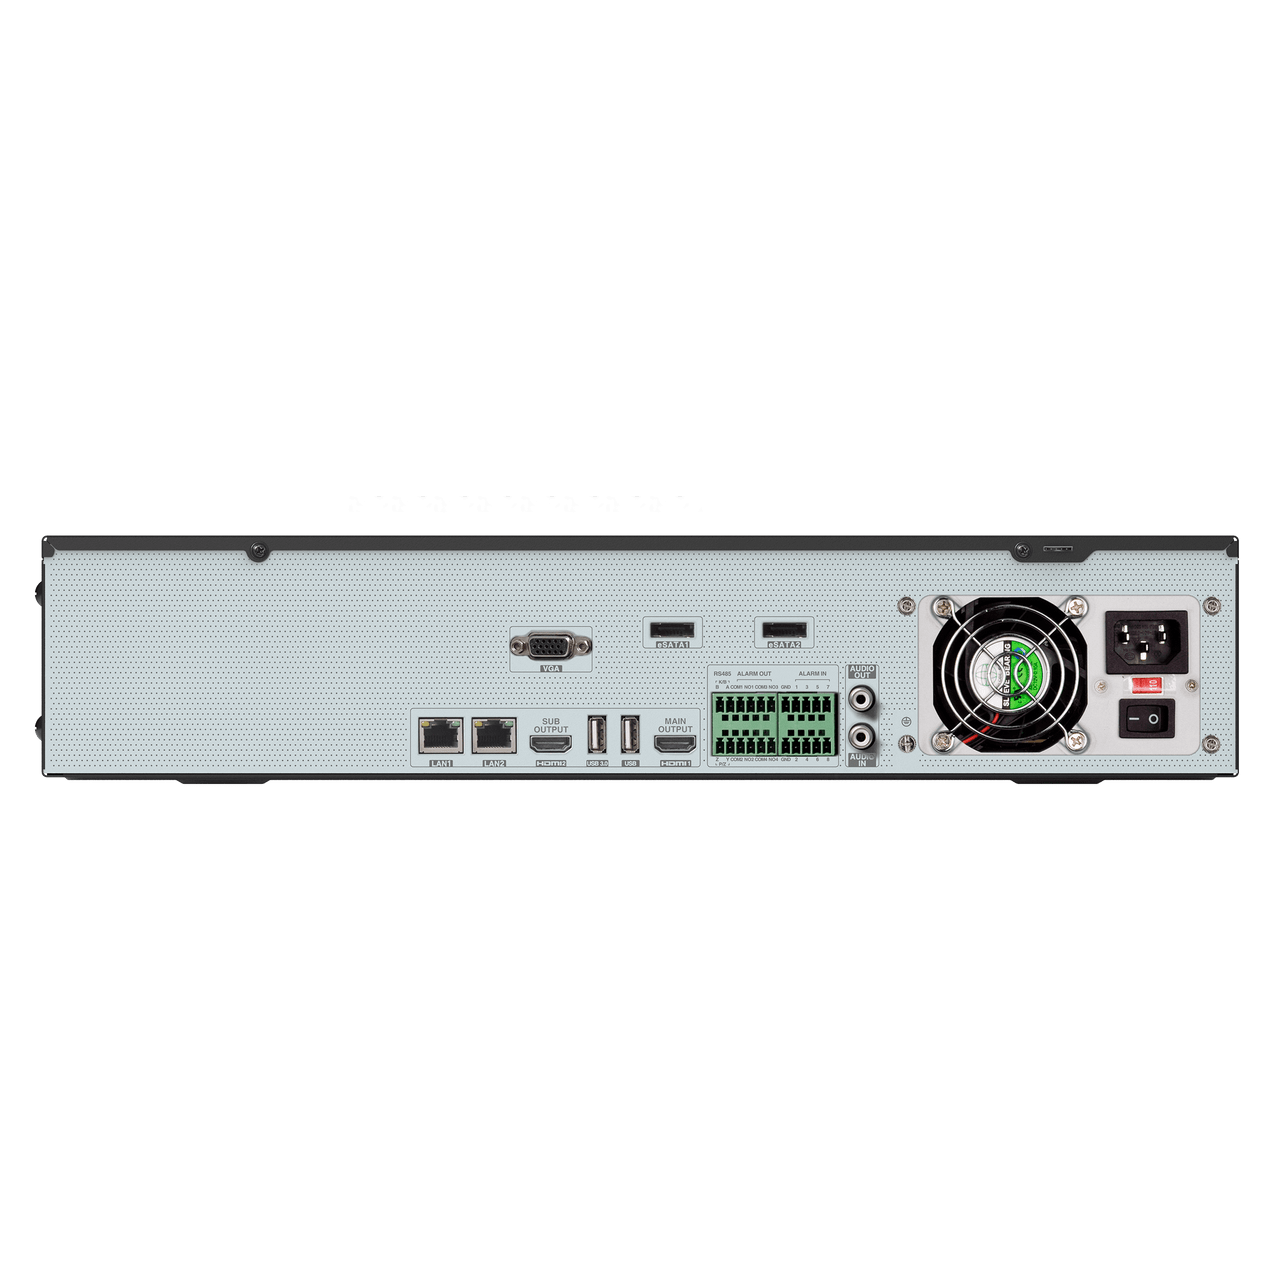 Speco Technologies N64NR16TB 64 Channel 4K H.265 NVR with Analytics- 16TB